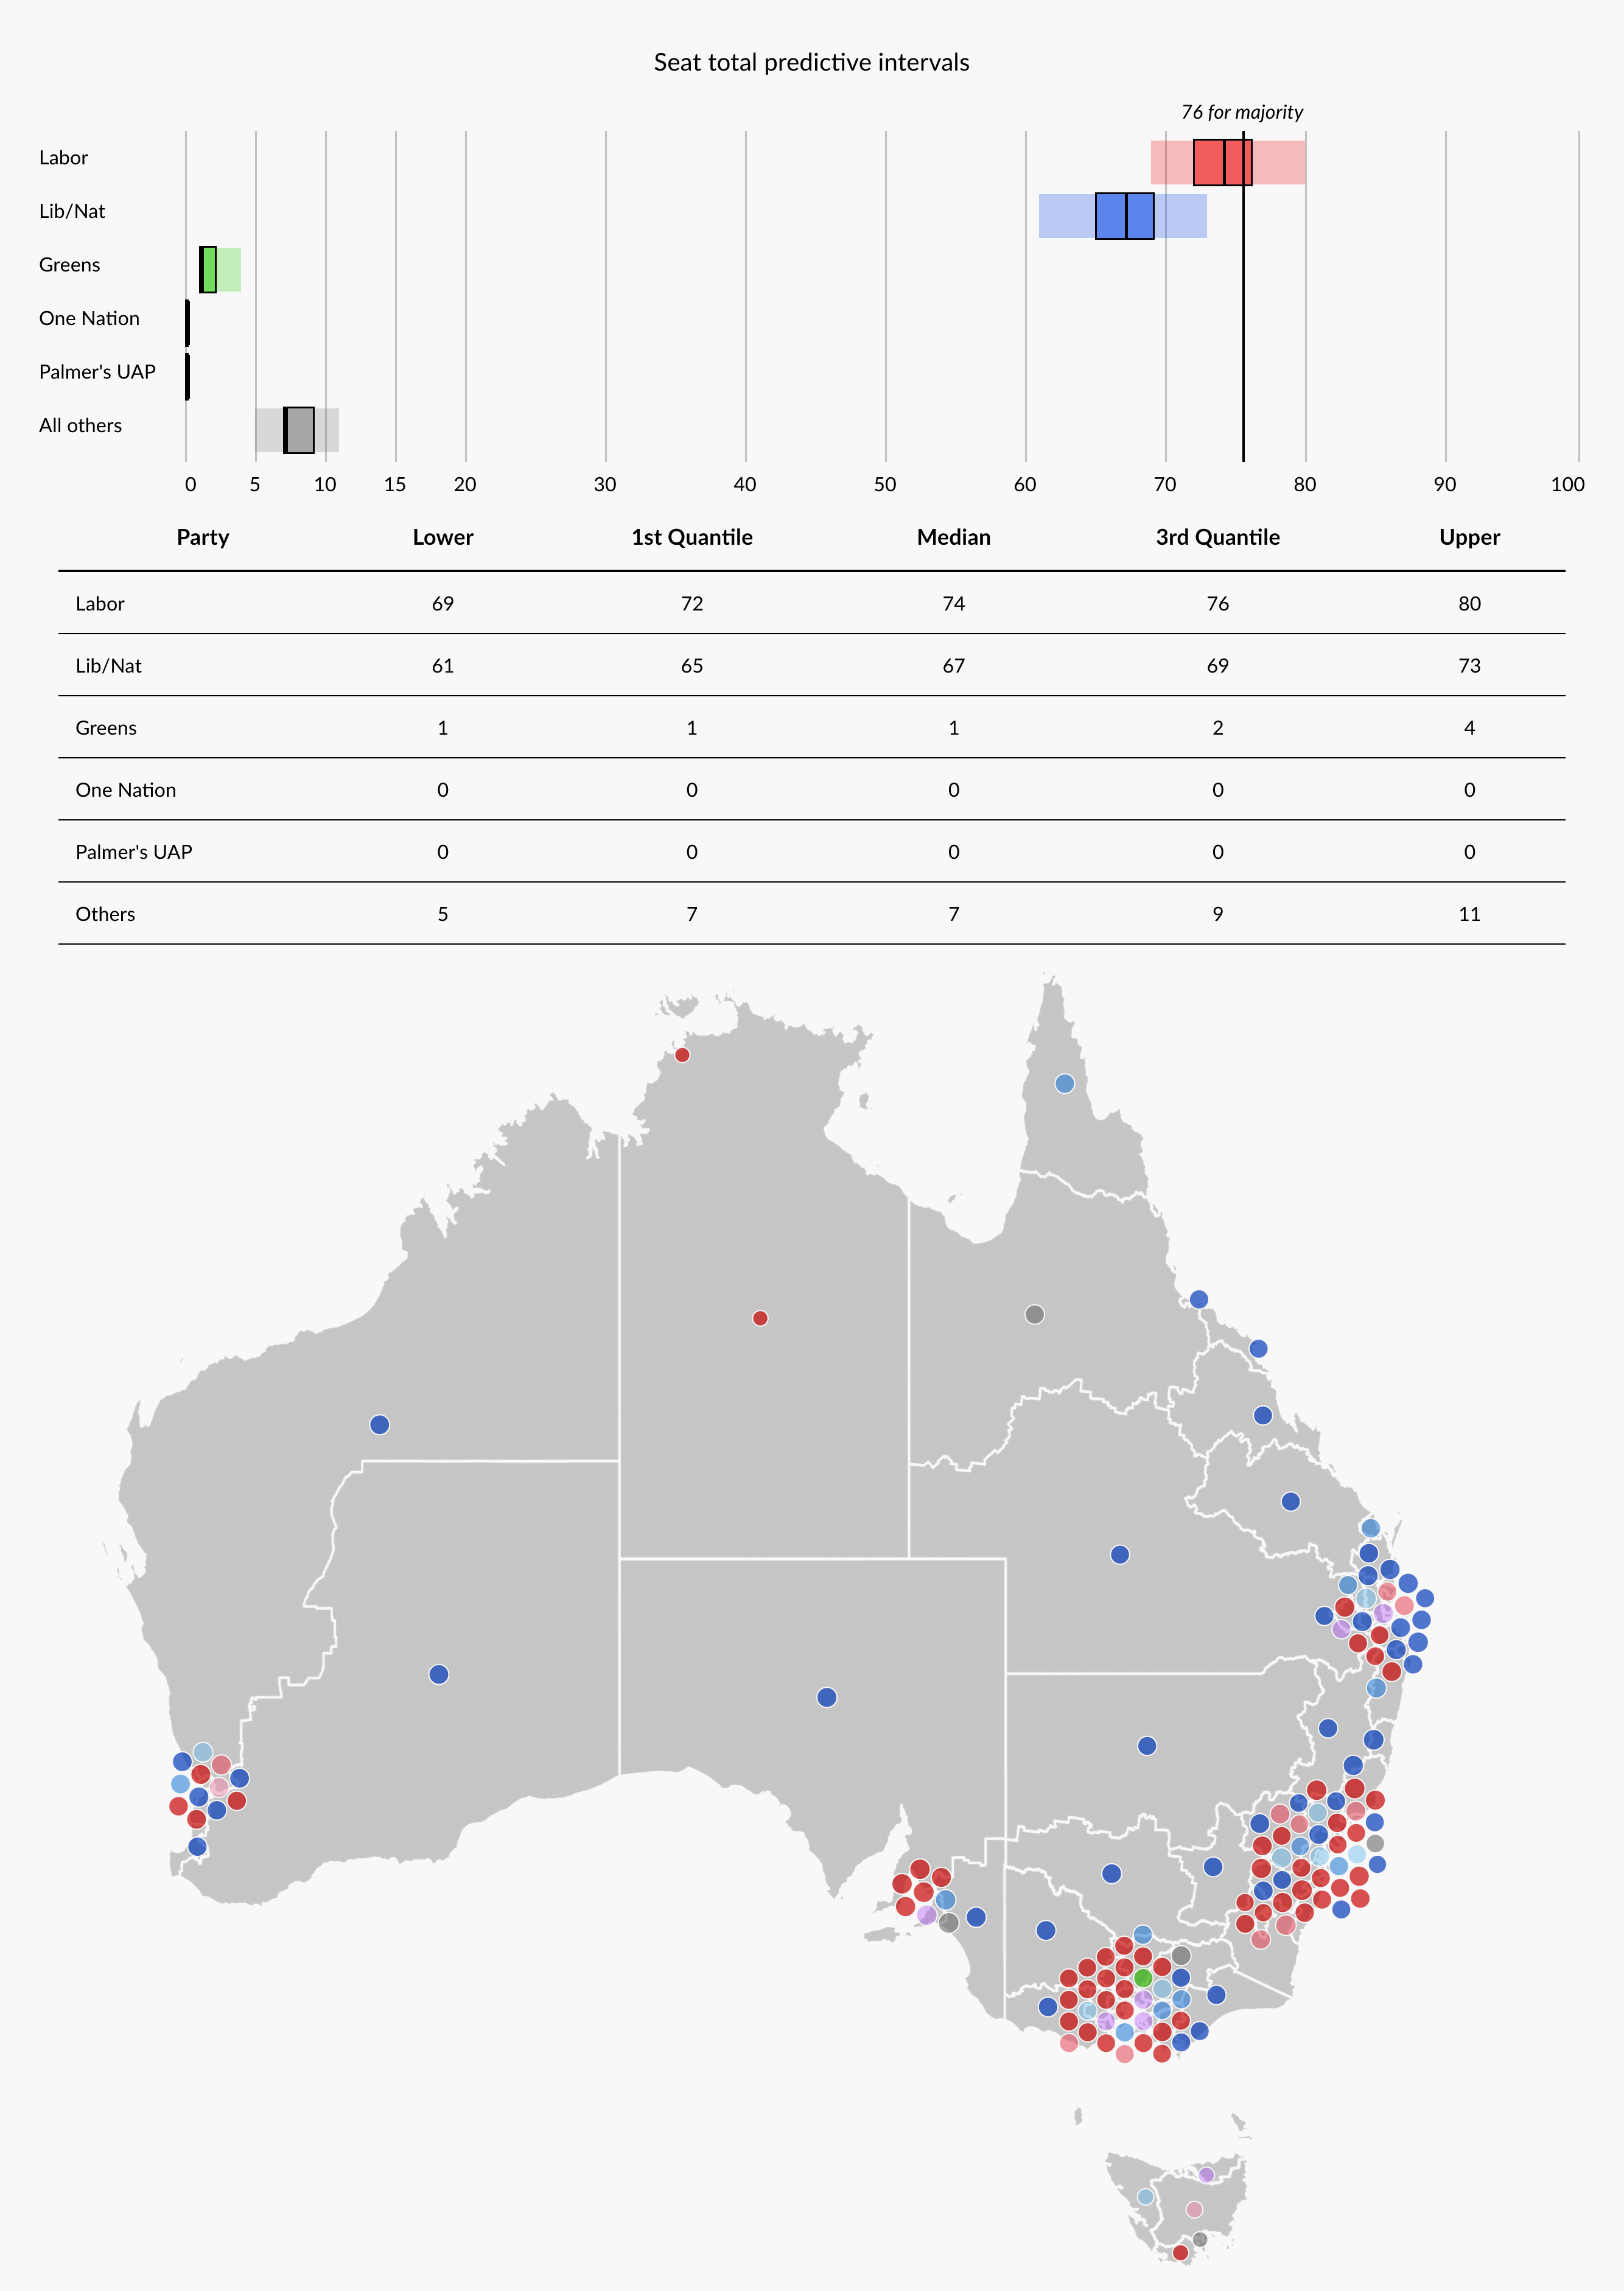 Simulated electoral map if Labor wins 51 on 2pp basis